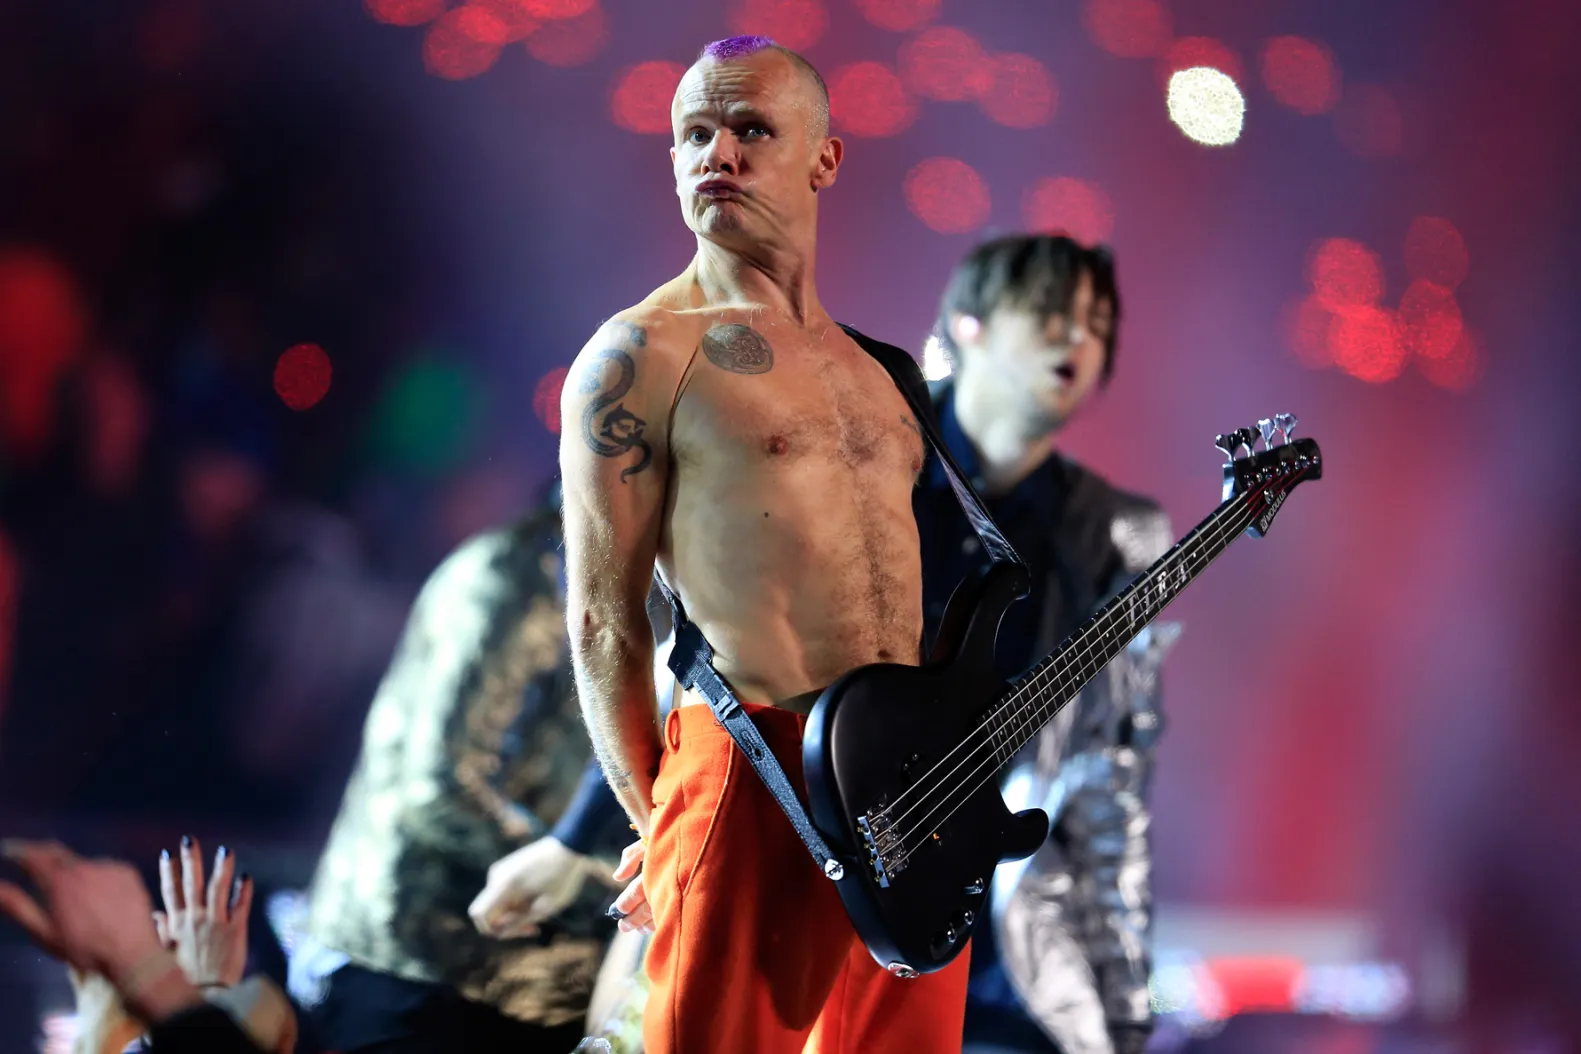 How Old Are the Red Hot Chili Peppers